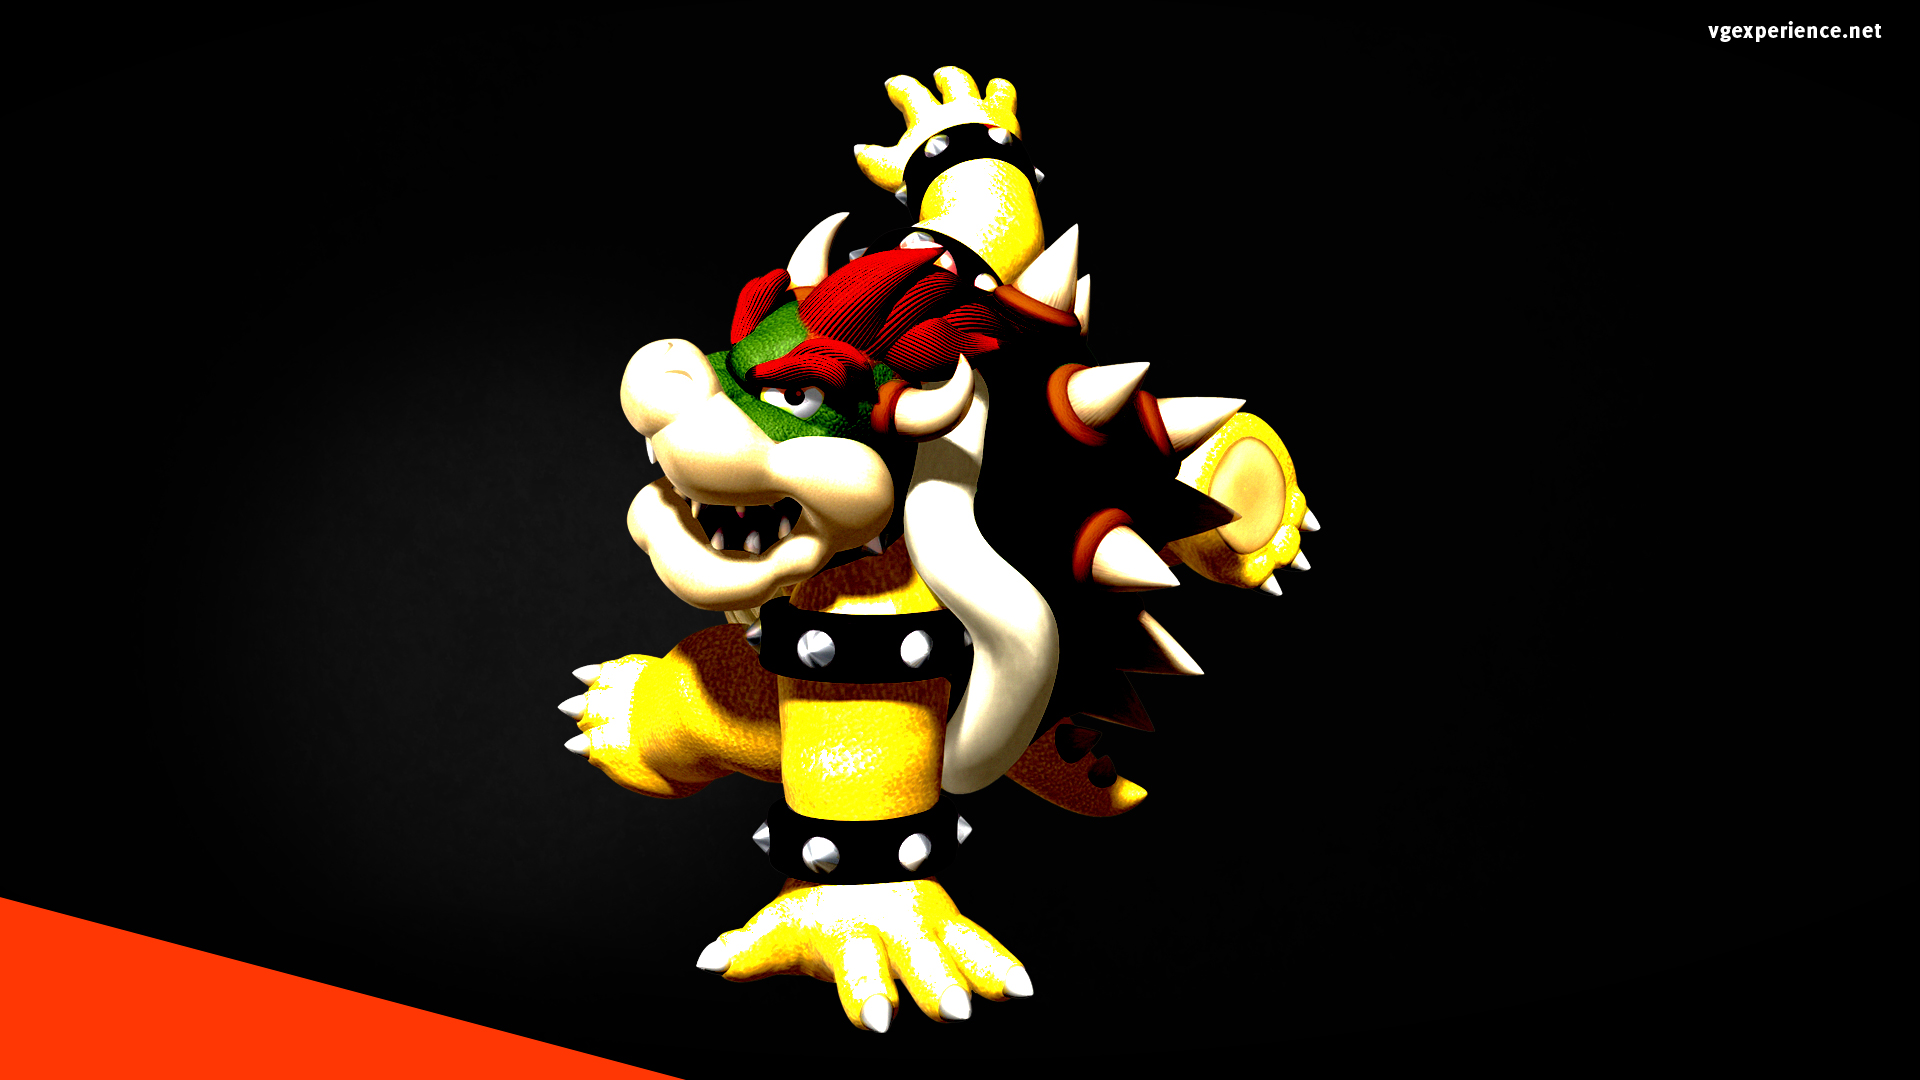 Bowser Wallpapers High Quality Download 1920x1080